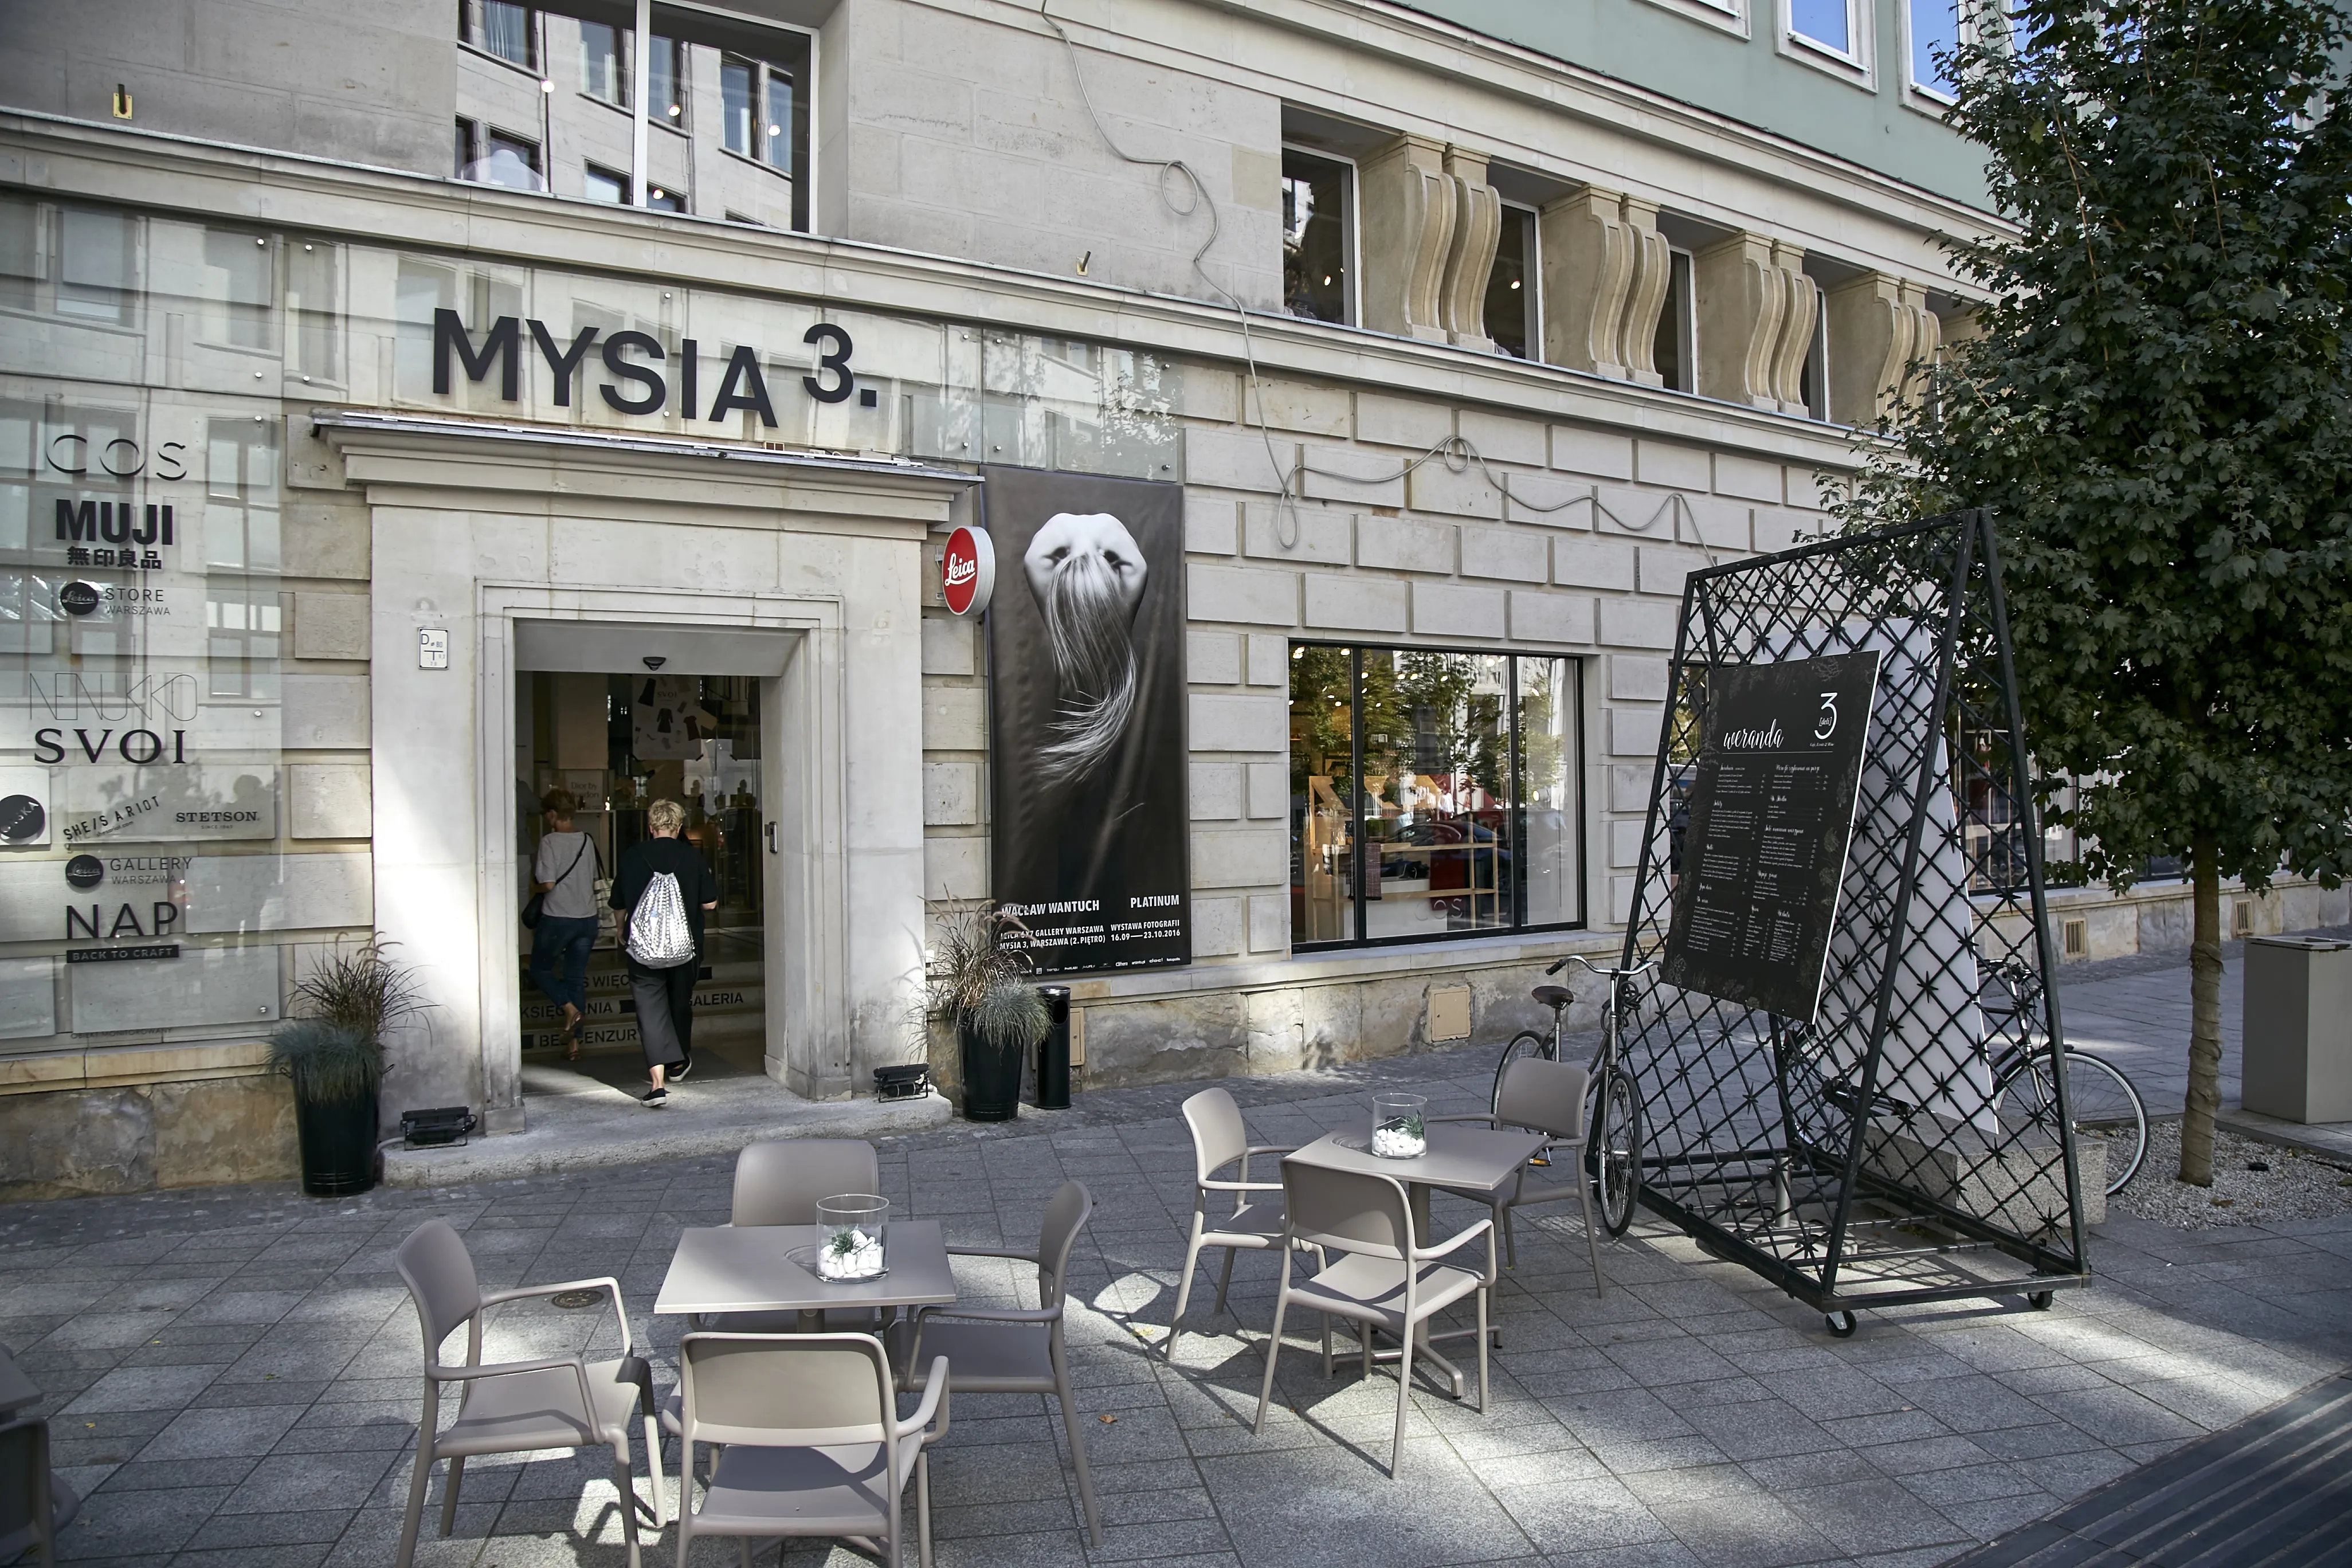 Mysia 3 in Poland, europe | Handbags,Shoes,Clothes,Cosmetics,Sportswear - Country Helper